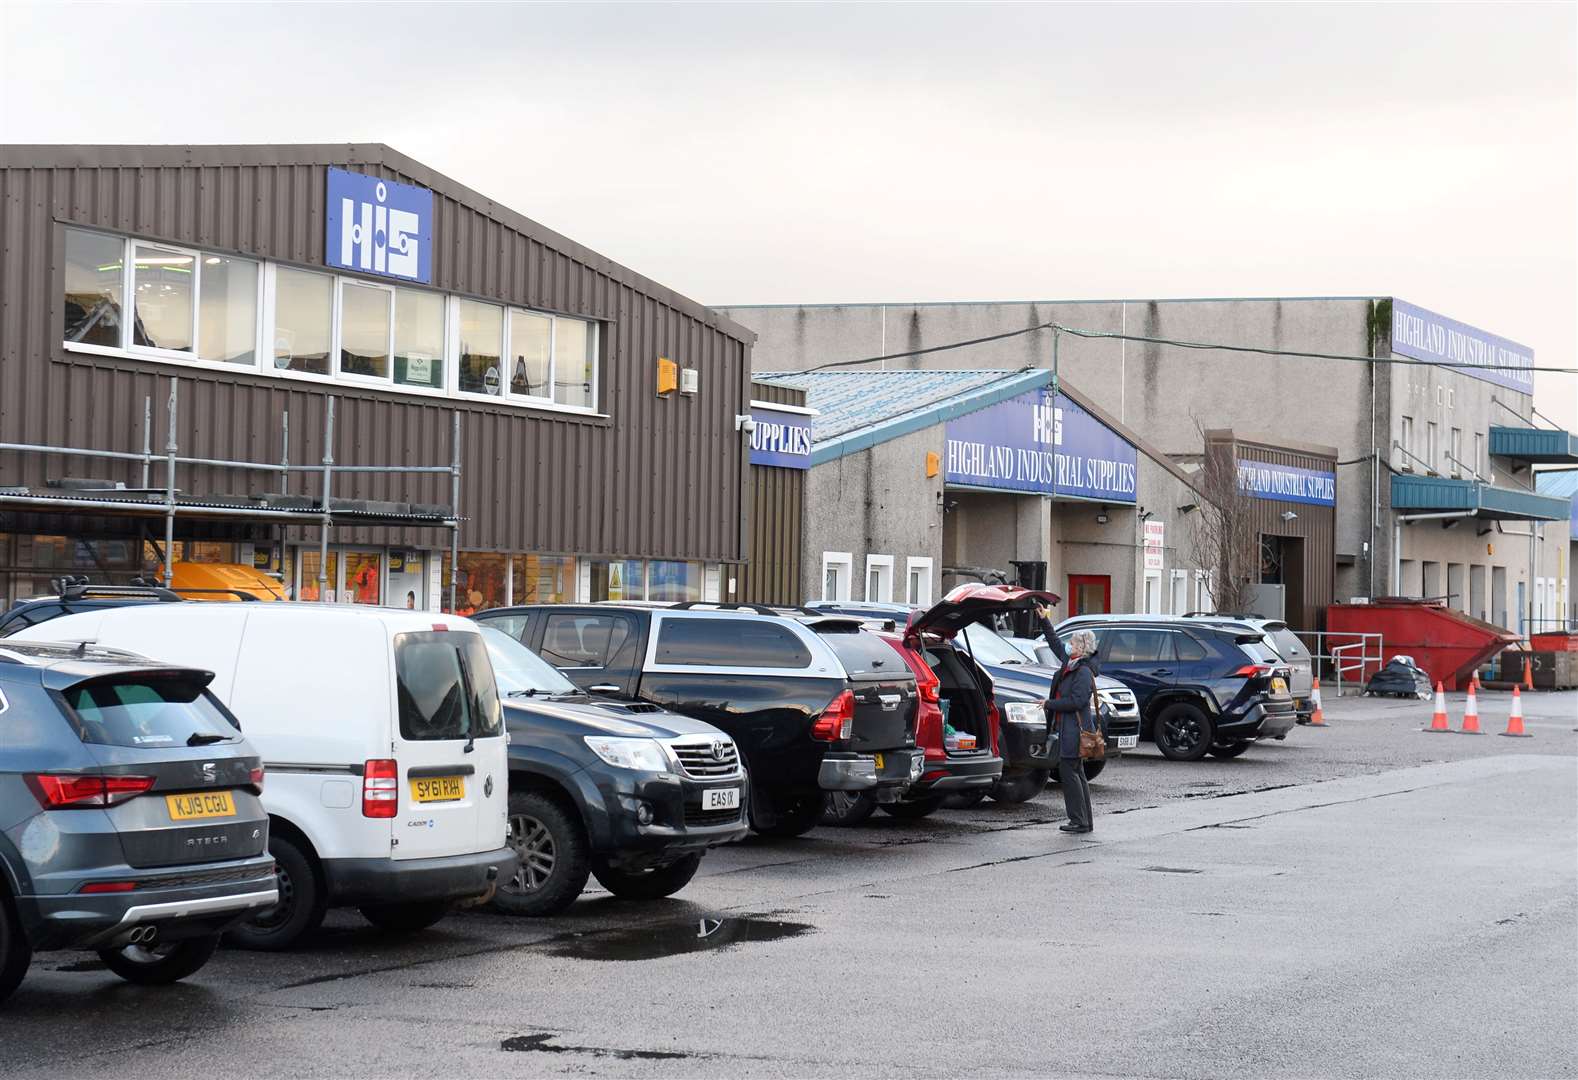 Highland Industrial Supplies is headquartered in Seafield Road, Inverness.